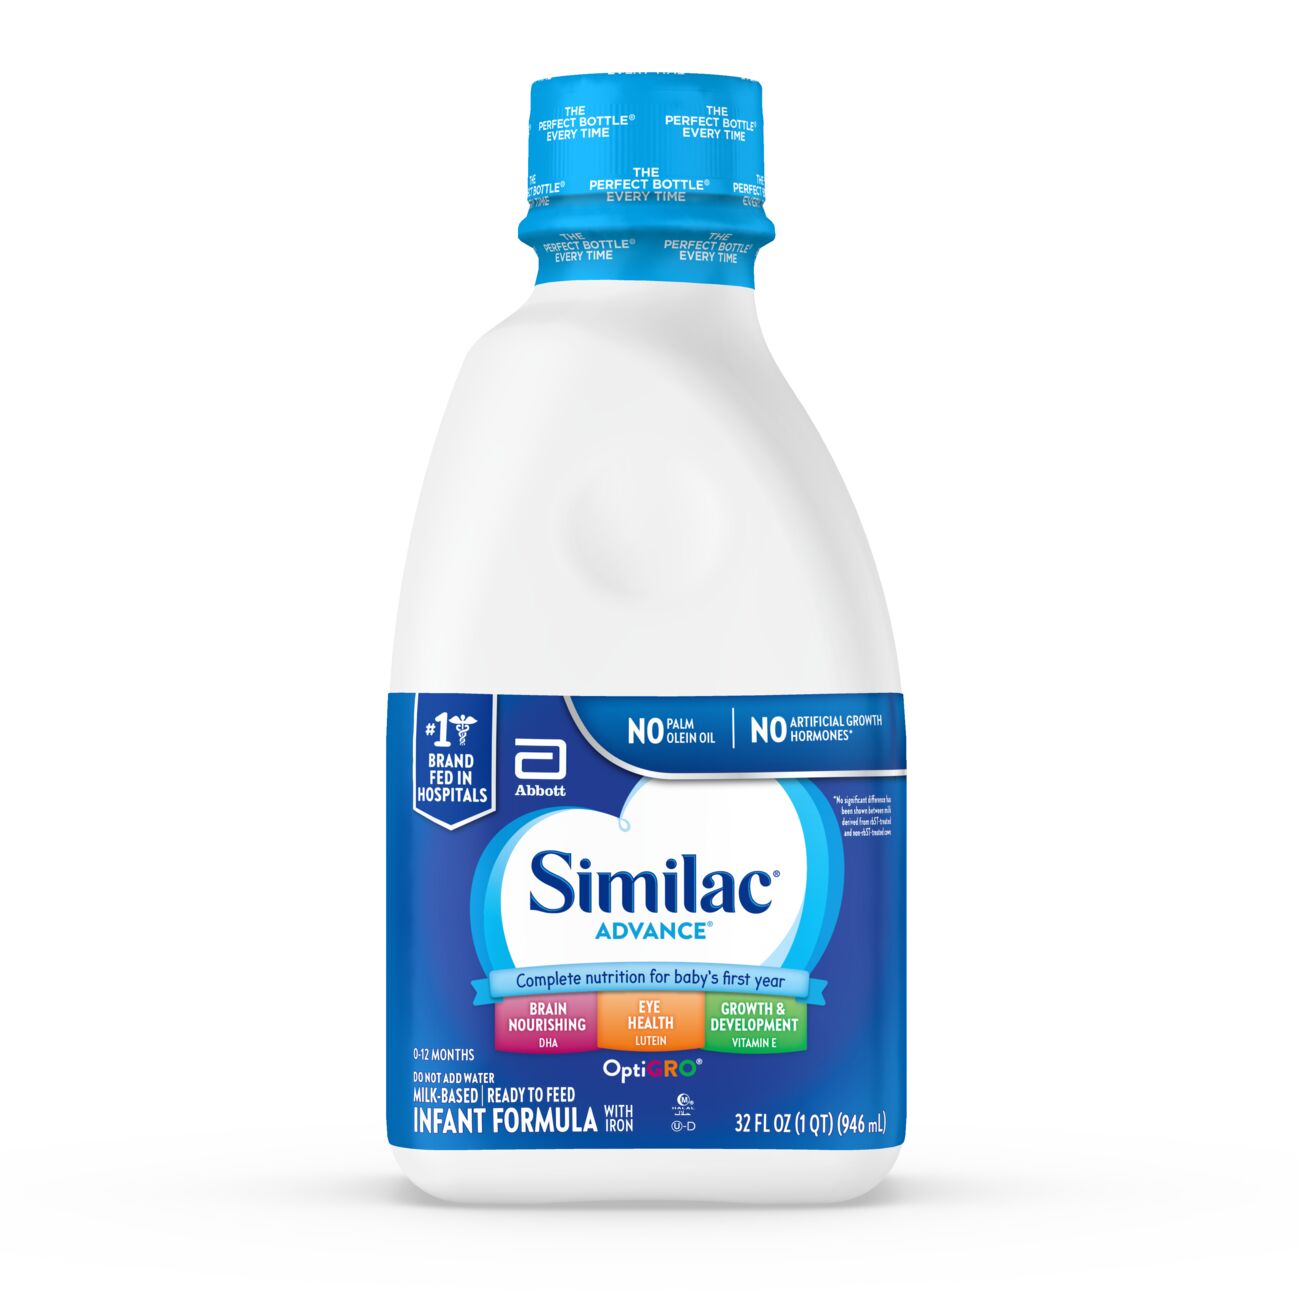 Similac Advance Ready-to-Feed Baby Formula with Iron, DHA, Lutein, 32-fl-oz Bottle, Pack of 6 - image 1 of 15